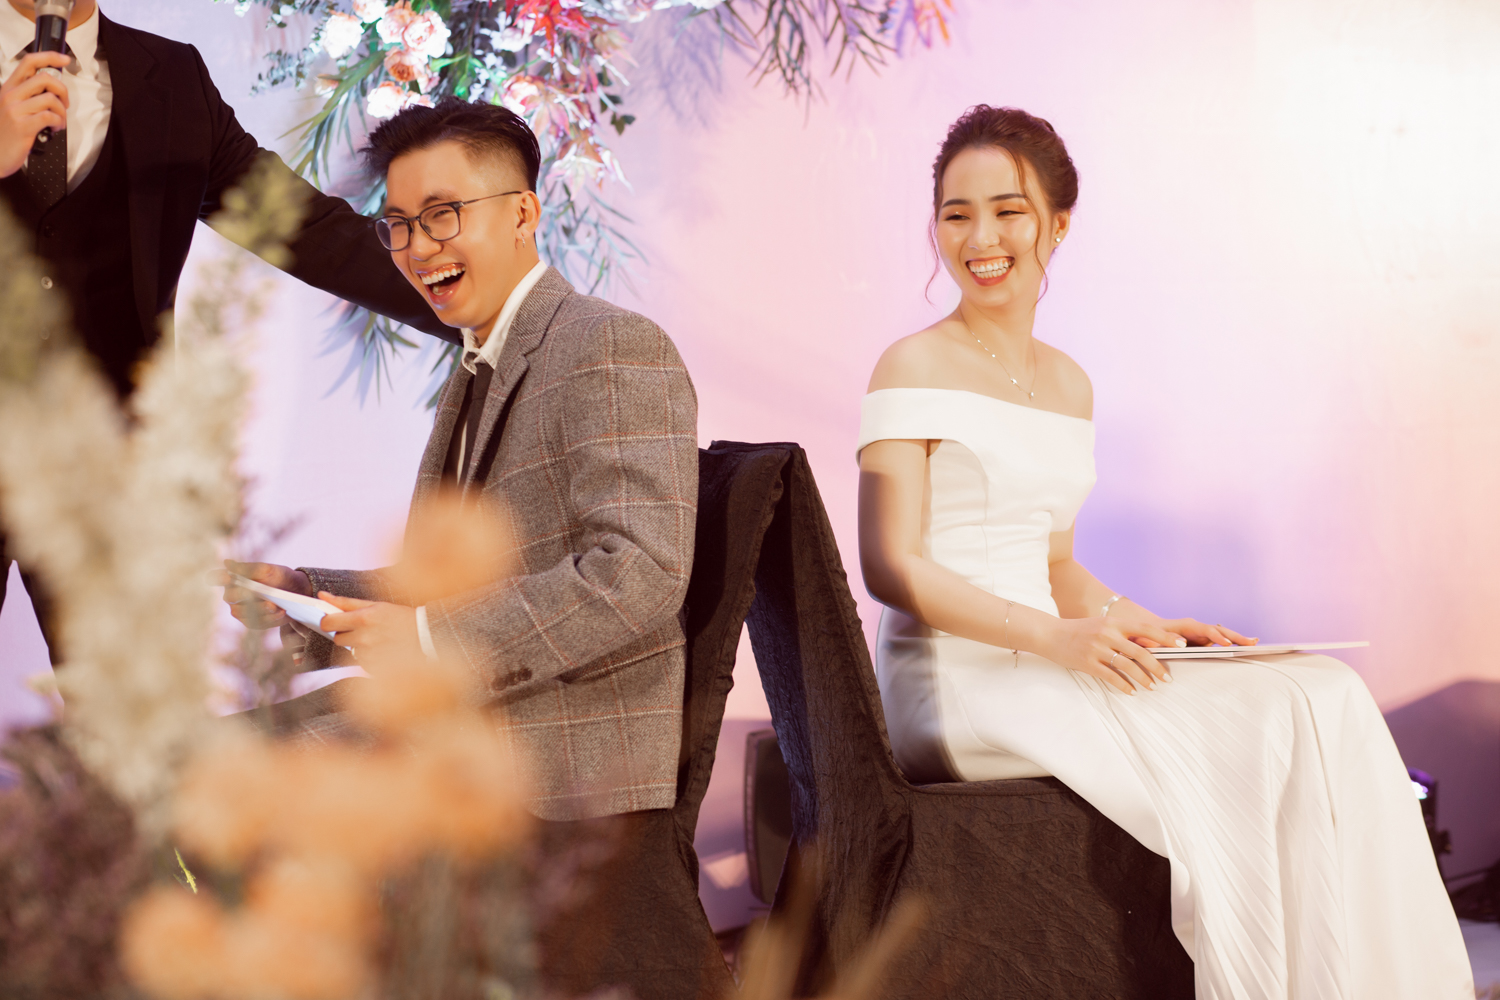 [ CEREMONY PREVIEW ] Vũ Linh & Thục Anh